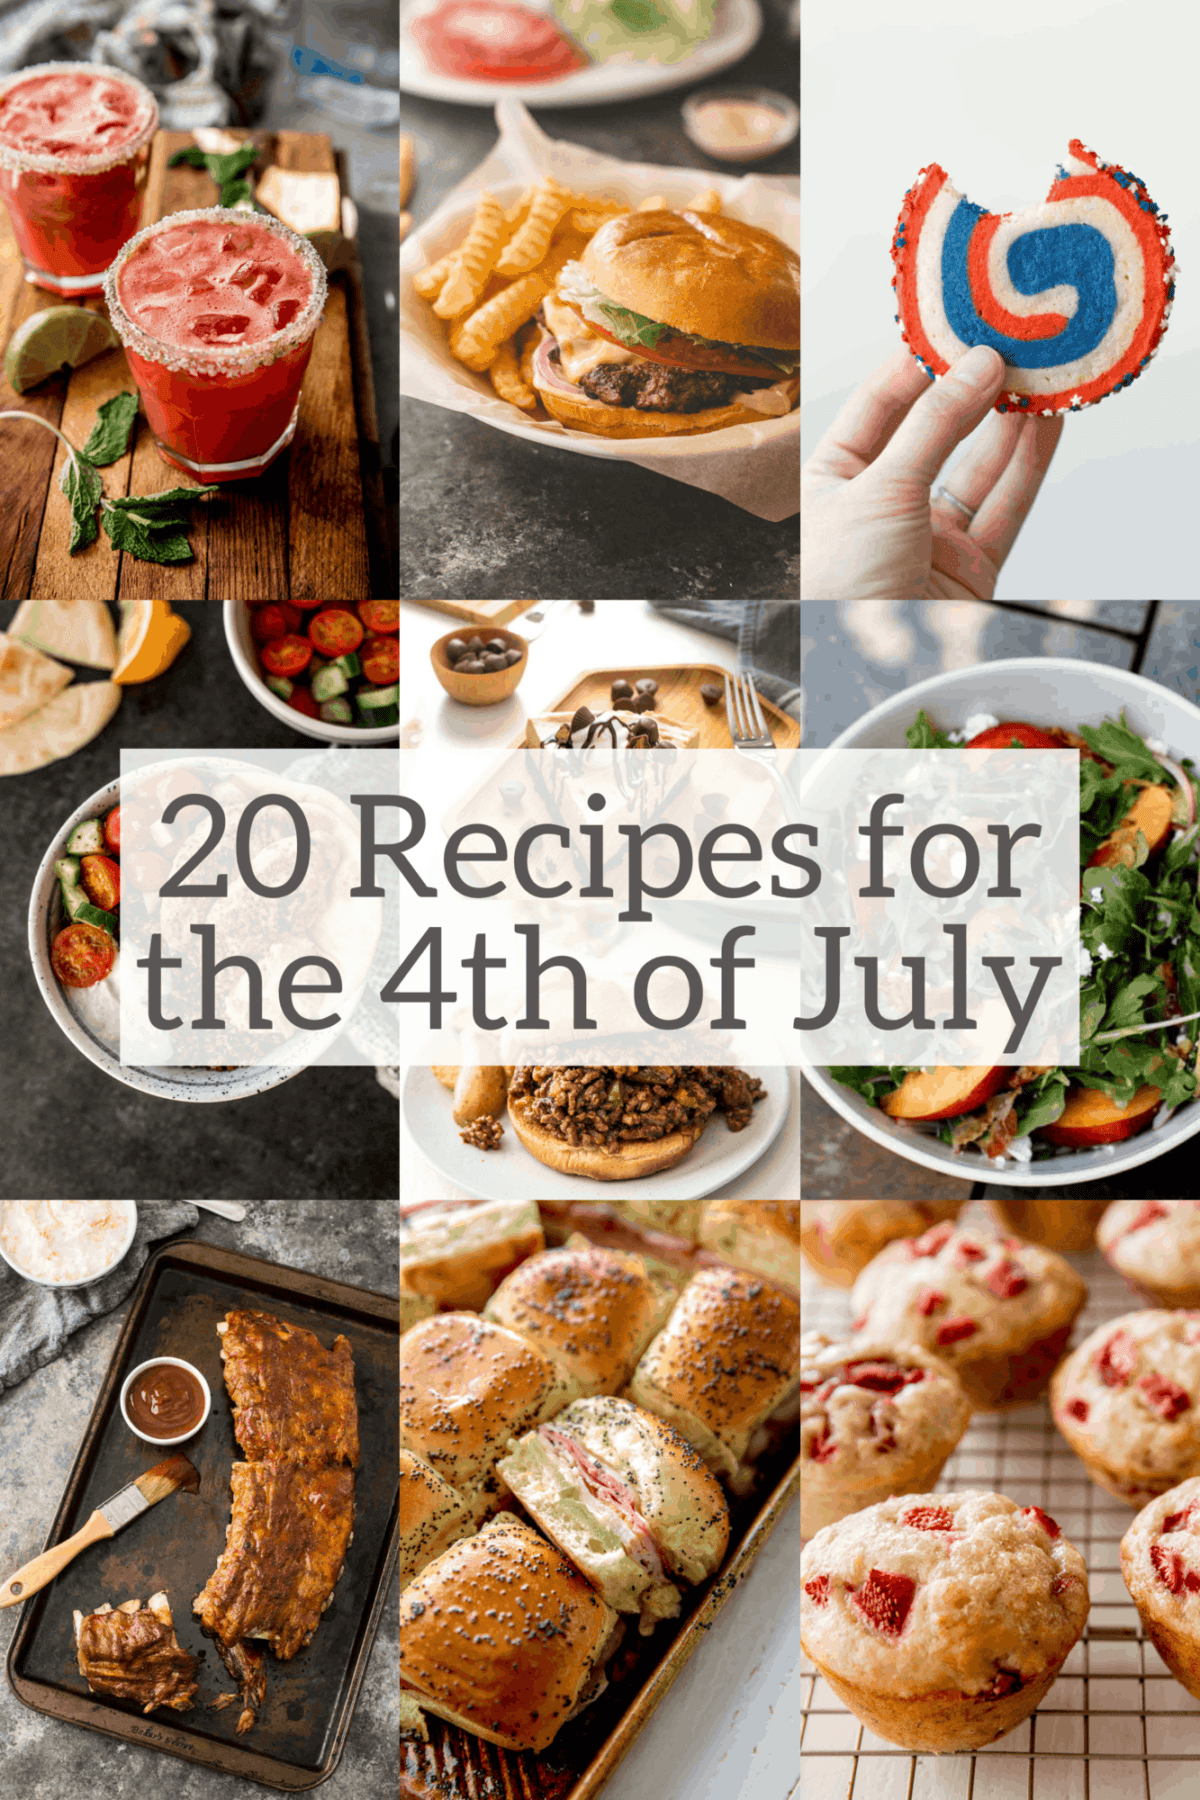 20 recipes for the 4th of July